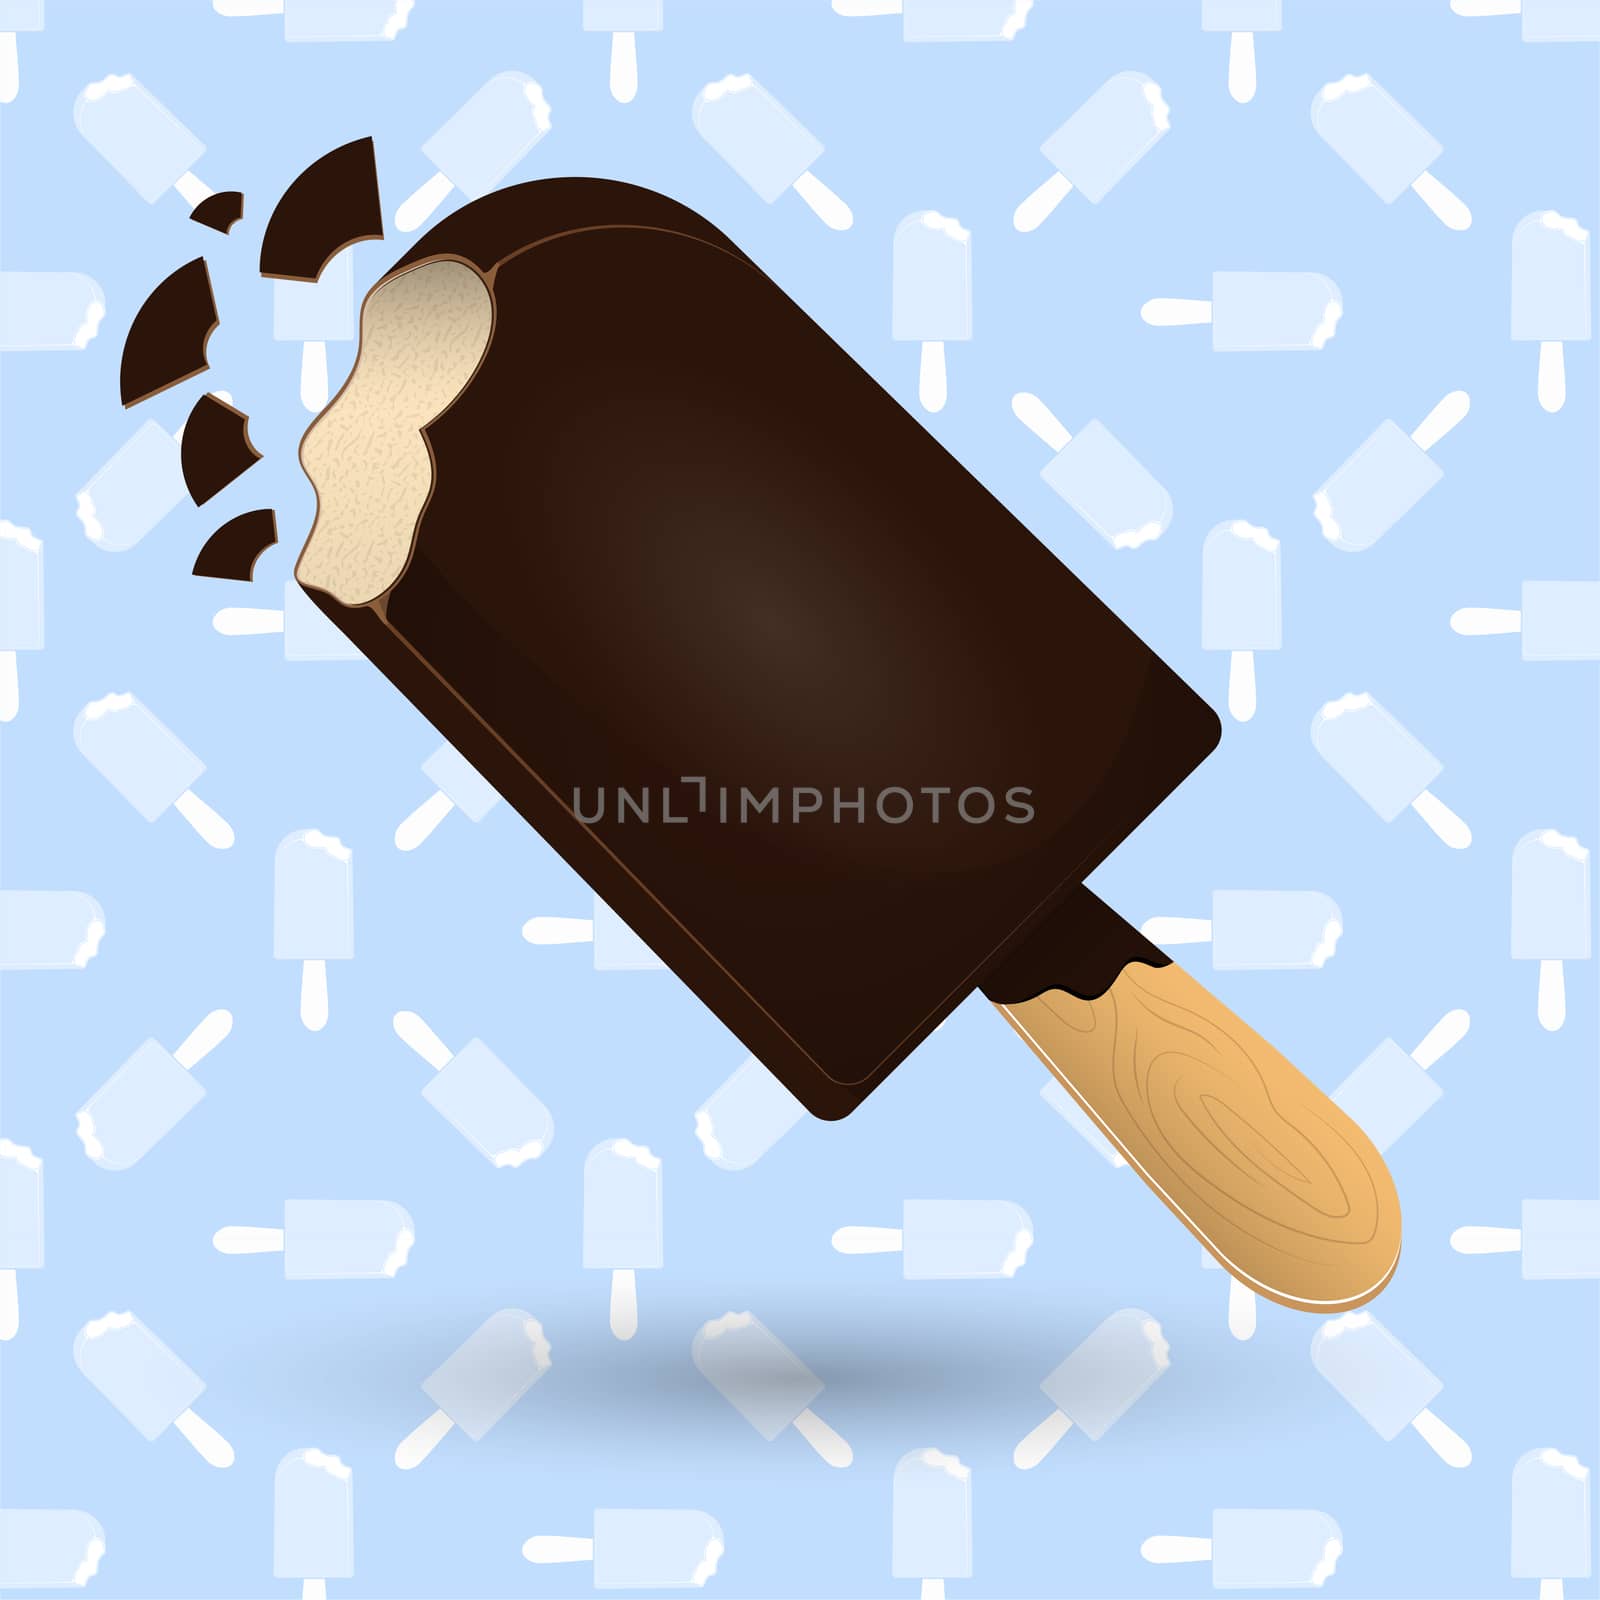 Ice cream in hot weather is the most delicious. The background can be used separately. illustration